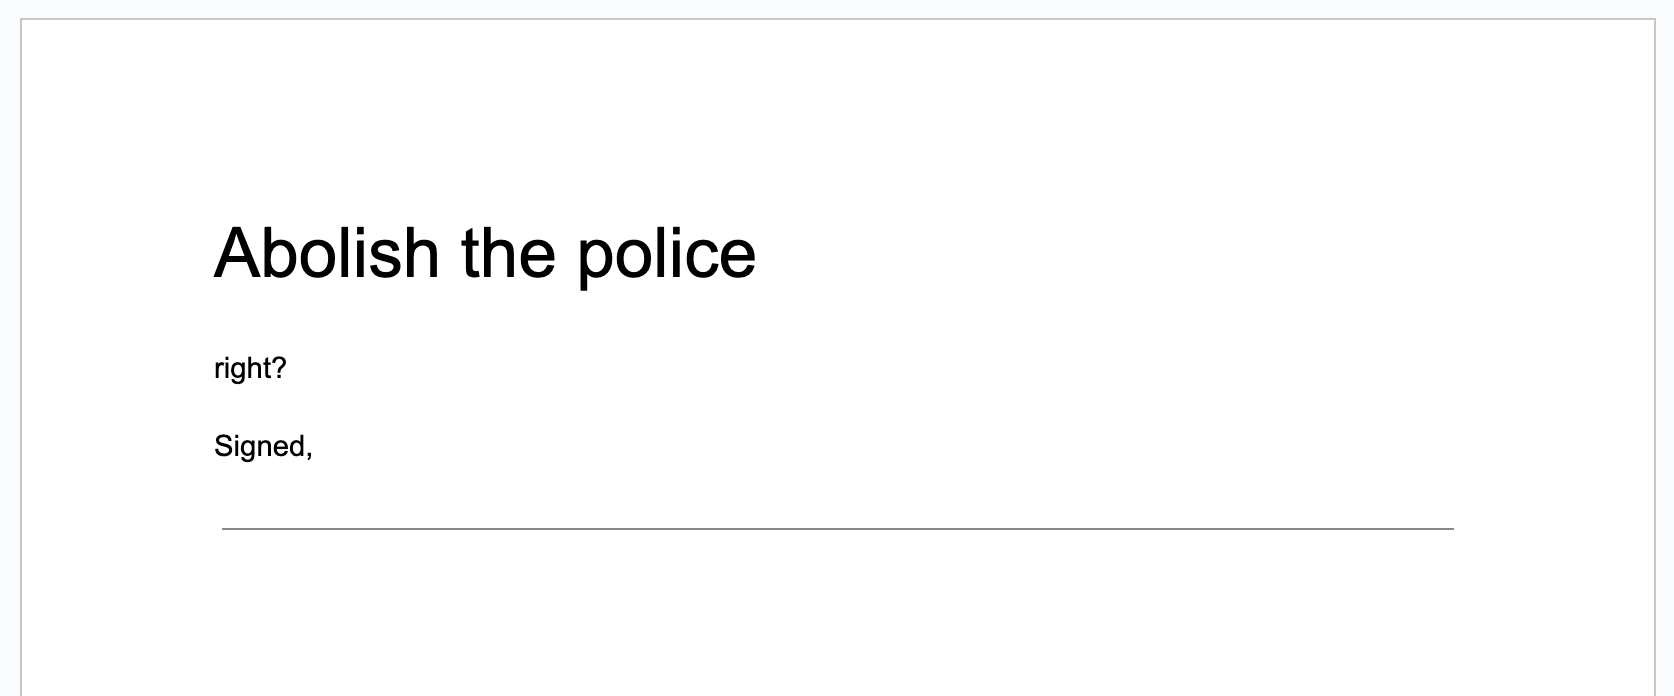 A screenshot of a Google Docs document titled “Abolish the police” with a horizontal rule after “Signed,”